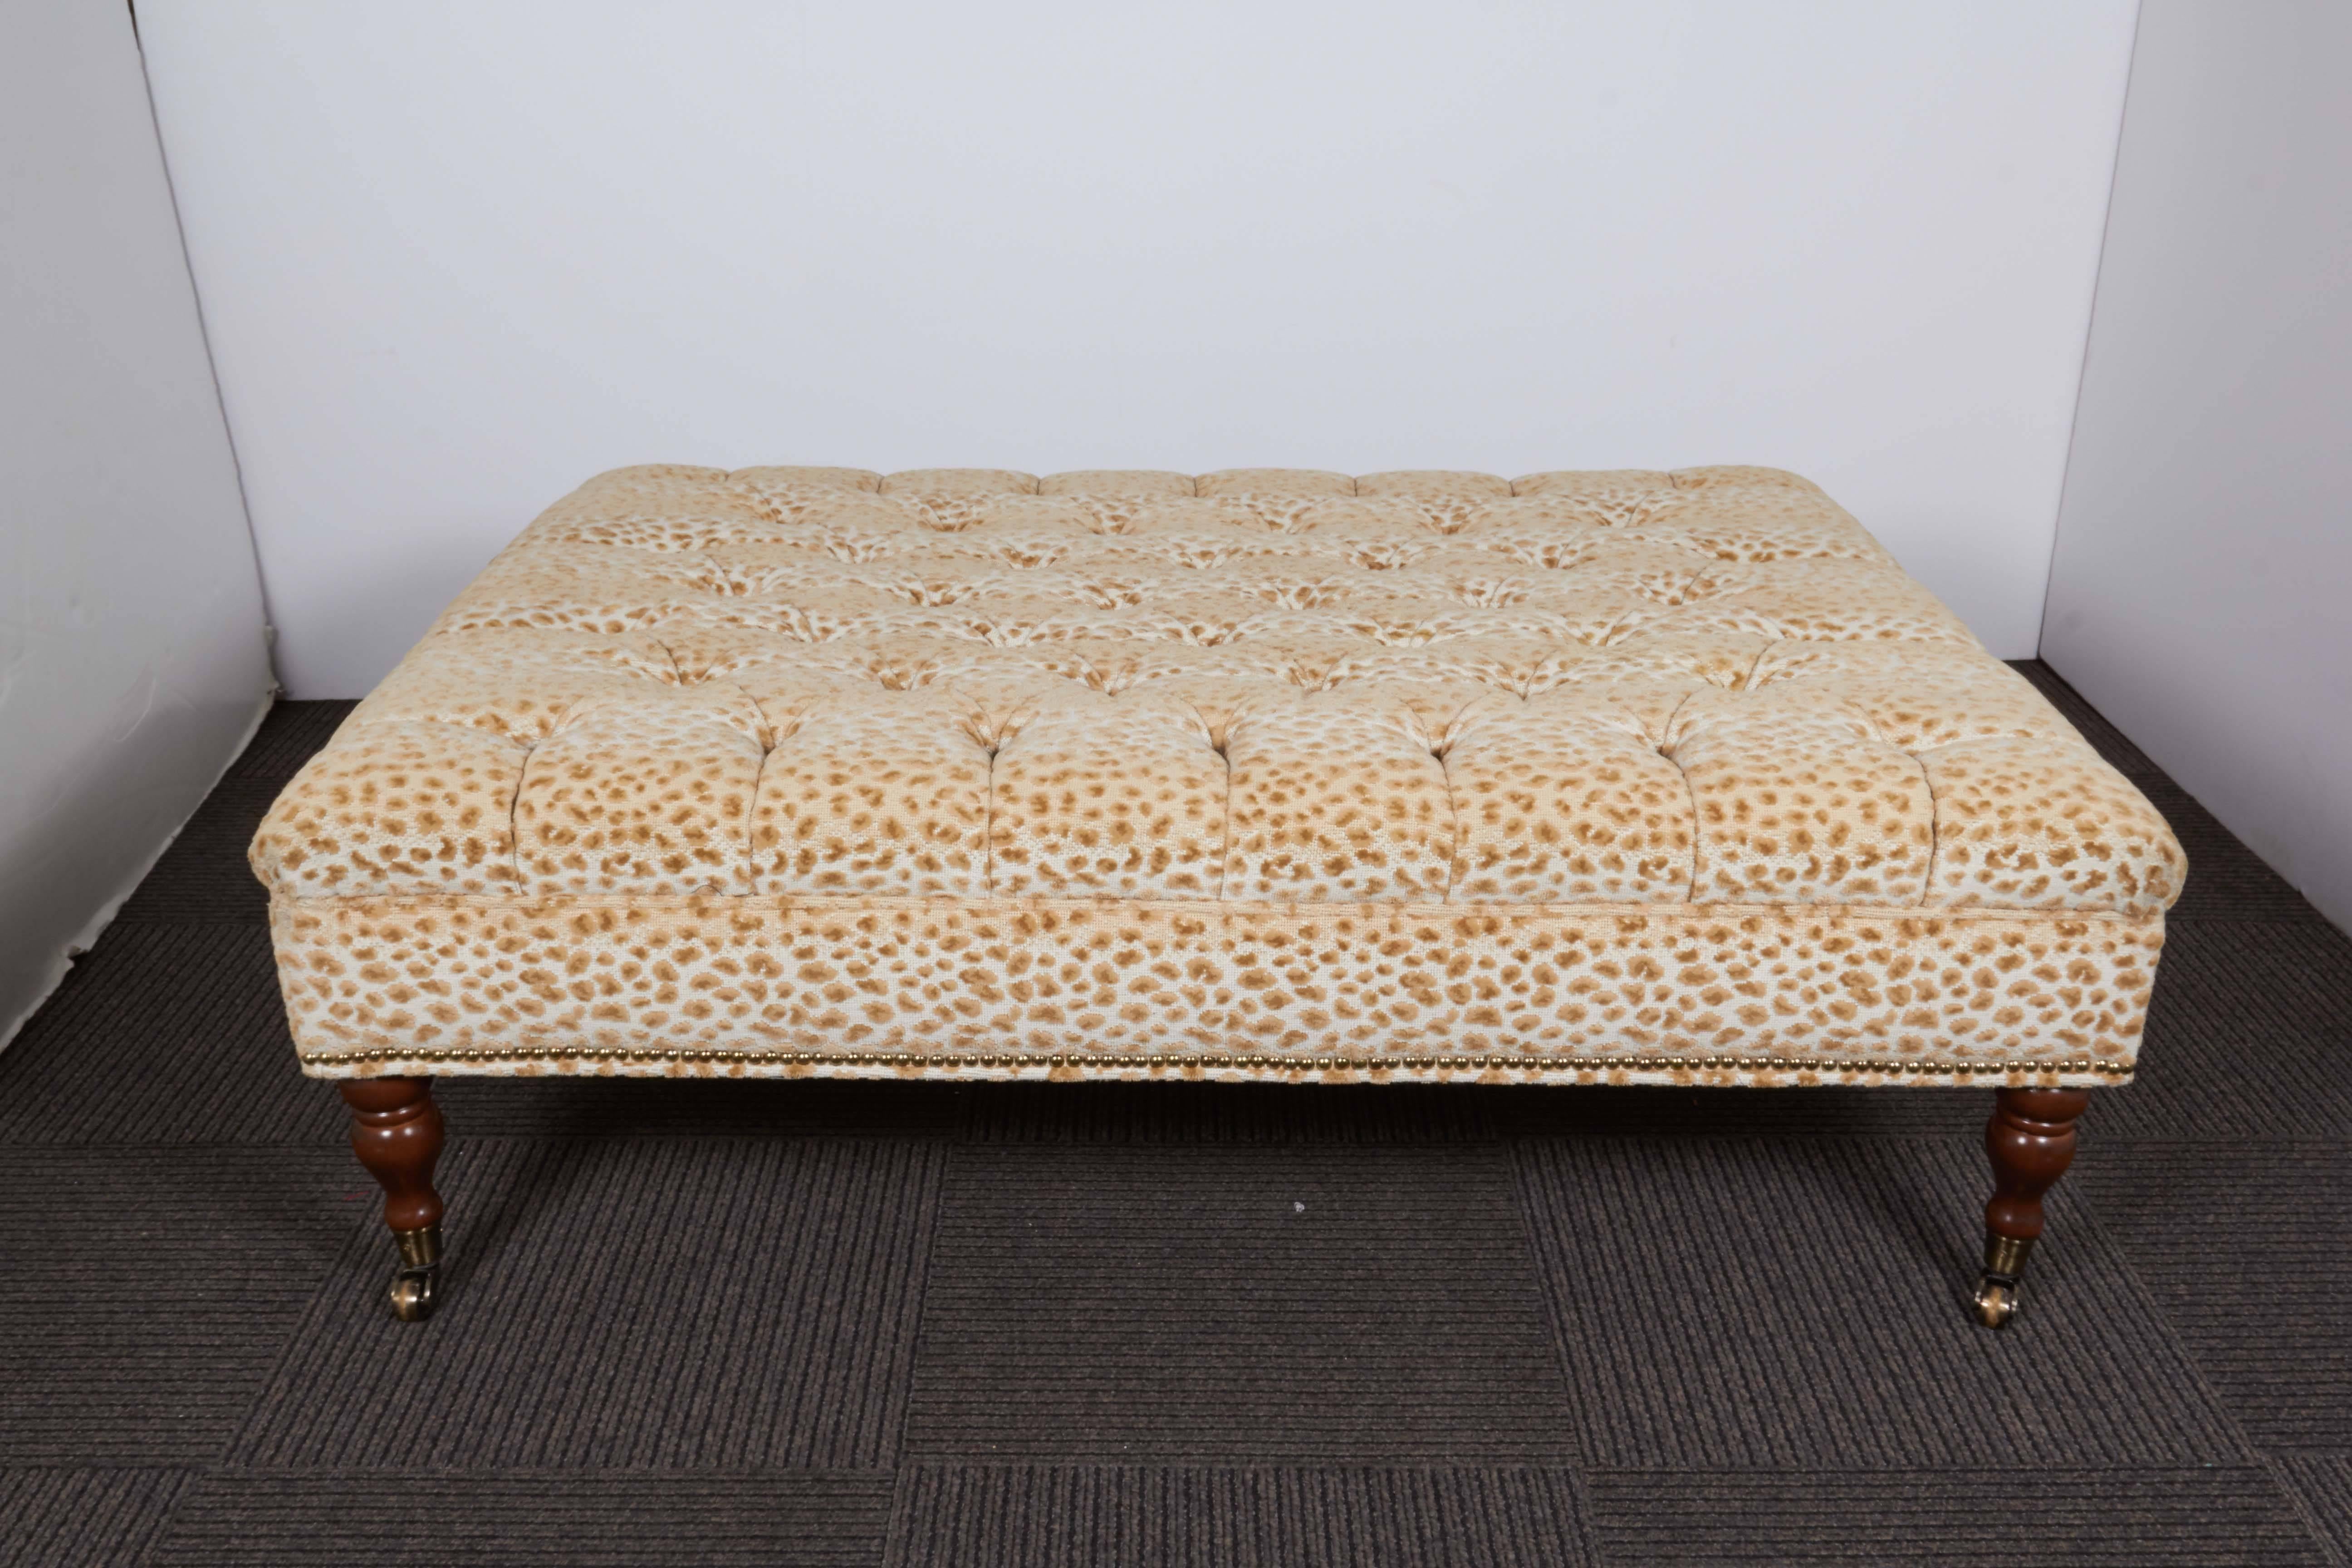 An oversized ottoman, following the style of George Smith, with tufted cushion seat with animal spot print, with brass nailhead trim, on turned wood, baluster form legs with caster wheels. Very good condition, consistent with age and use.